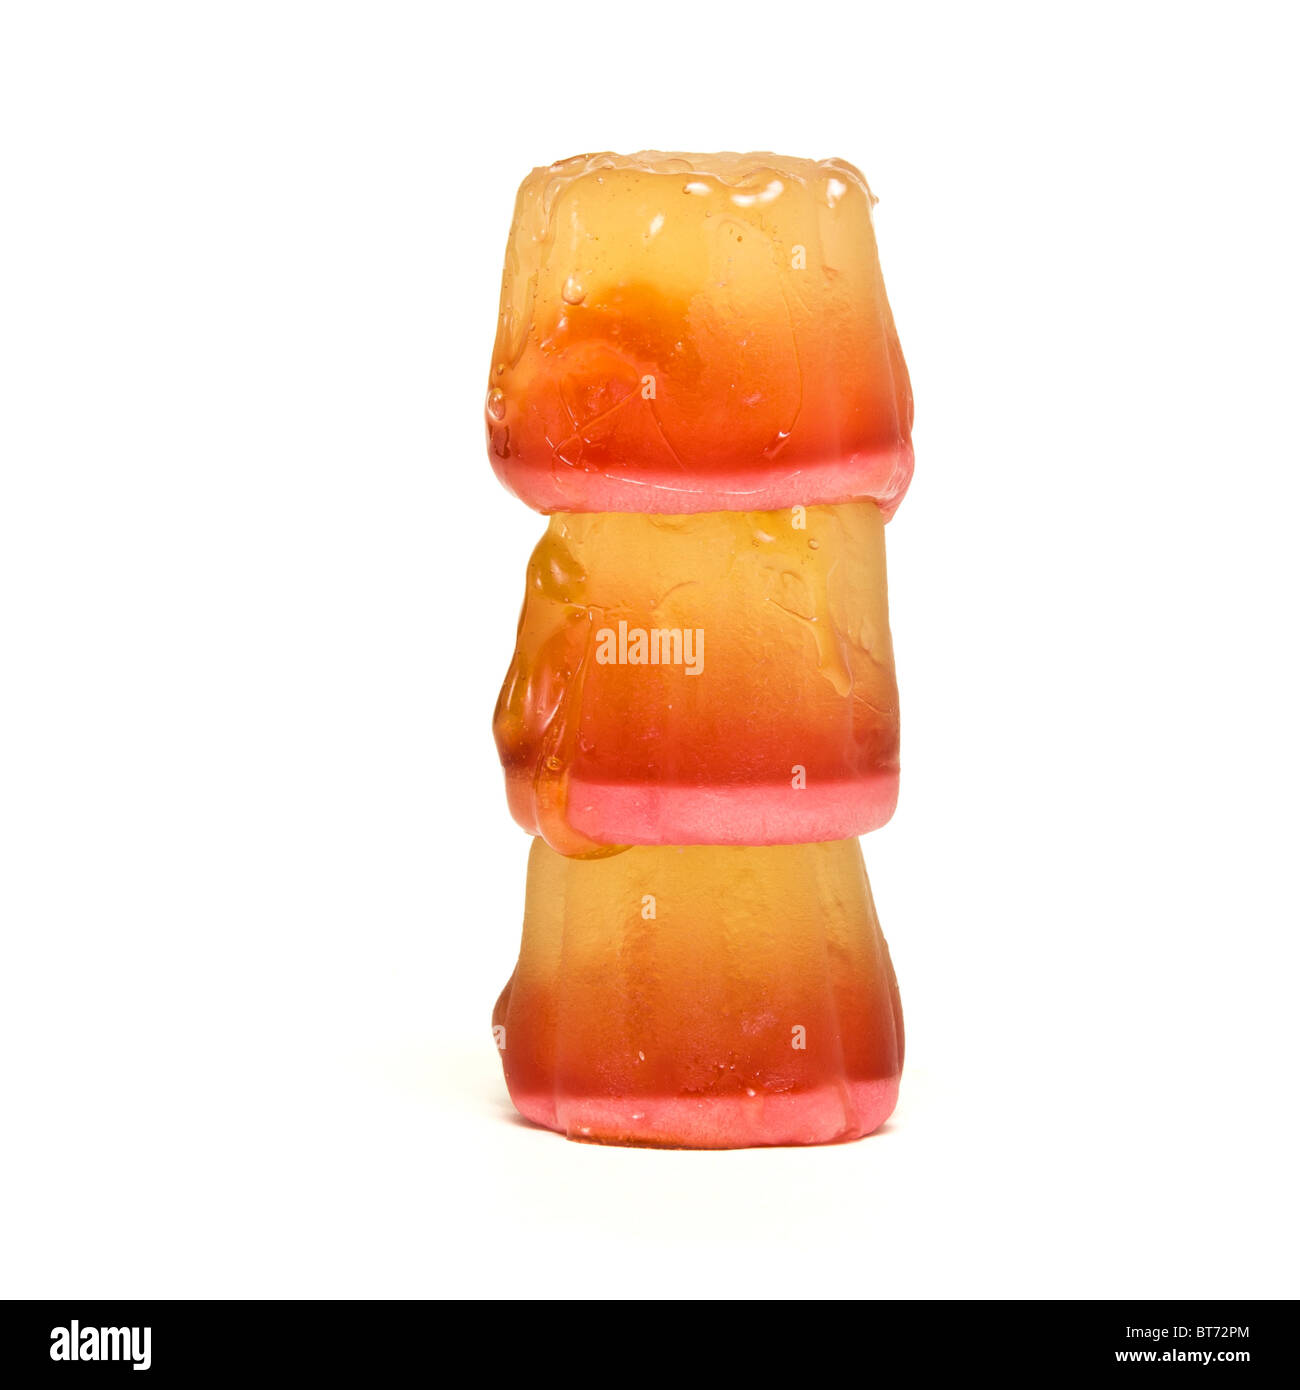 Colorful sugar jelly candy strip over white background Stock Photo - Alamy